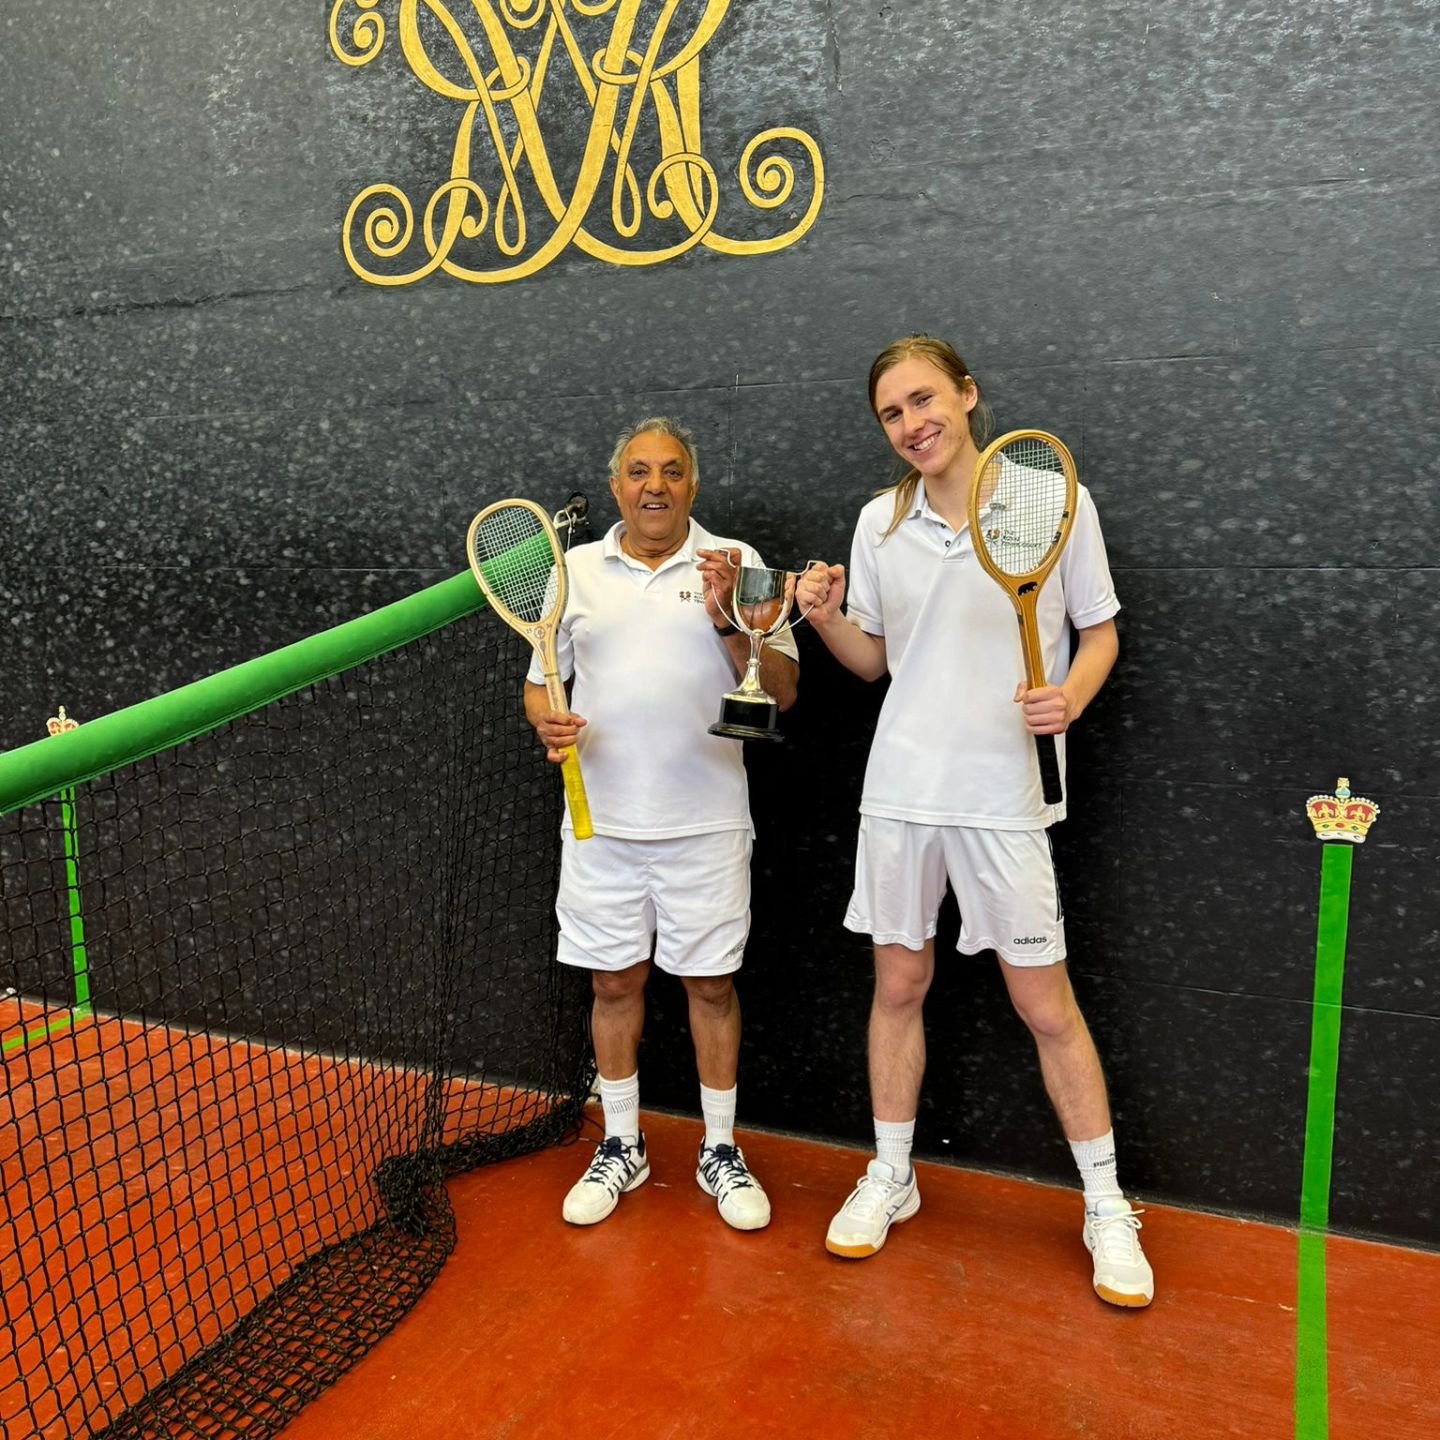 Bashir Mohammed &amp; Max Morland win the RTC Handicap Doubles tournament defeating Will Emmines and Jack Short this weekend!
32 pairs competing in a double group stage event providing lots of tennis for everyone. Over the weekend we had 37 matches w